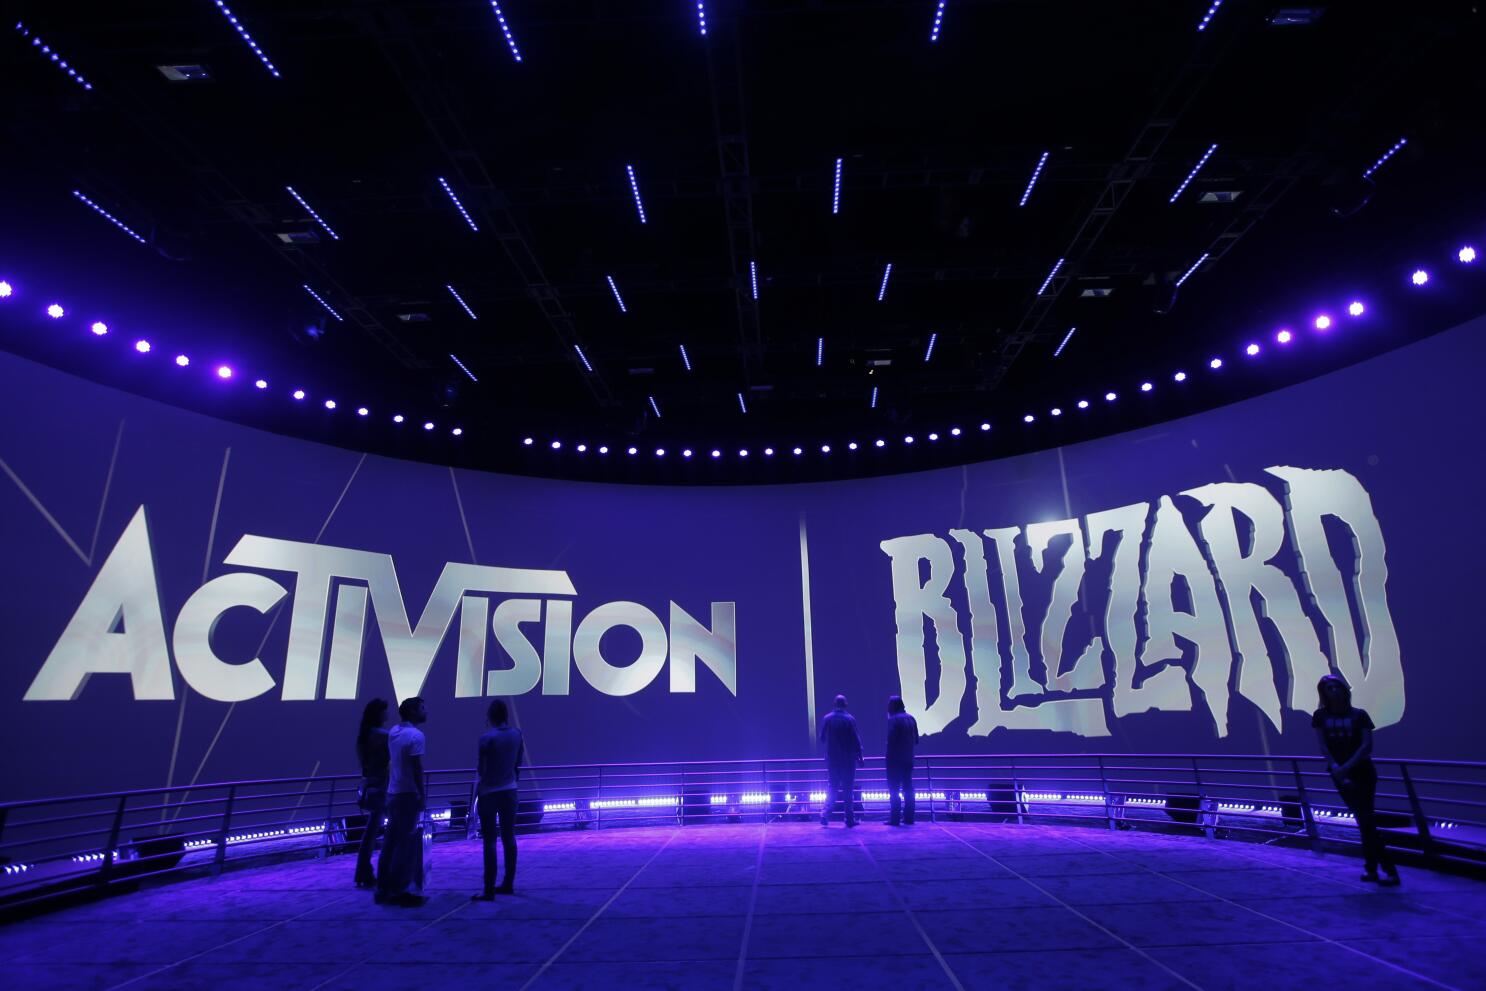 Microsoft to stream all current and future Activision Blizzard